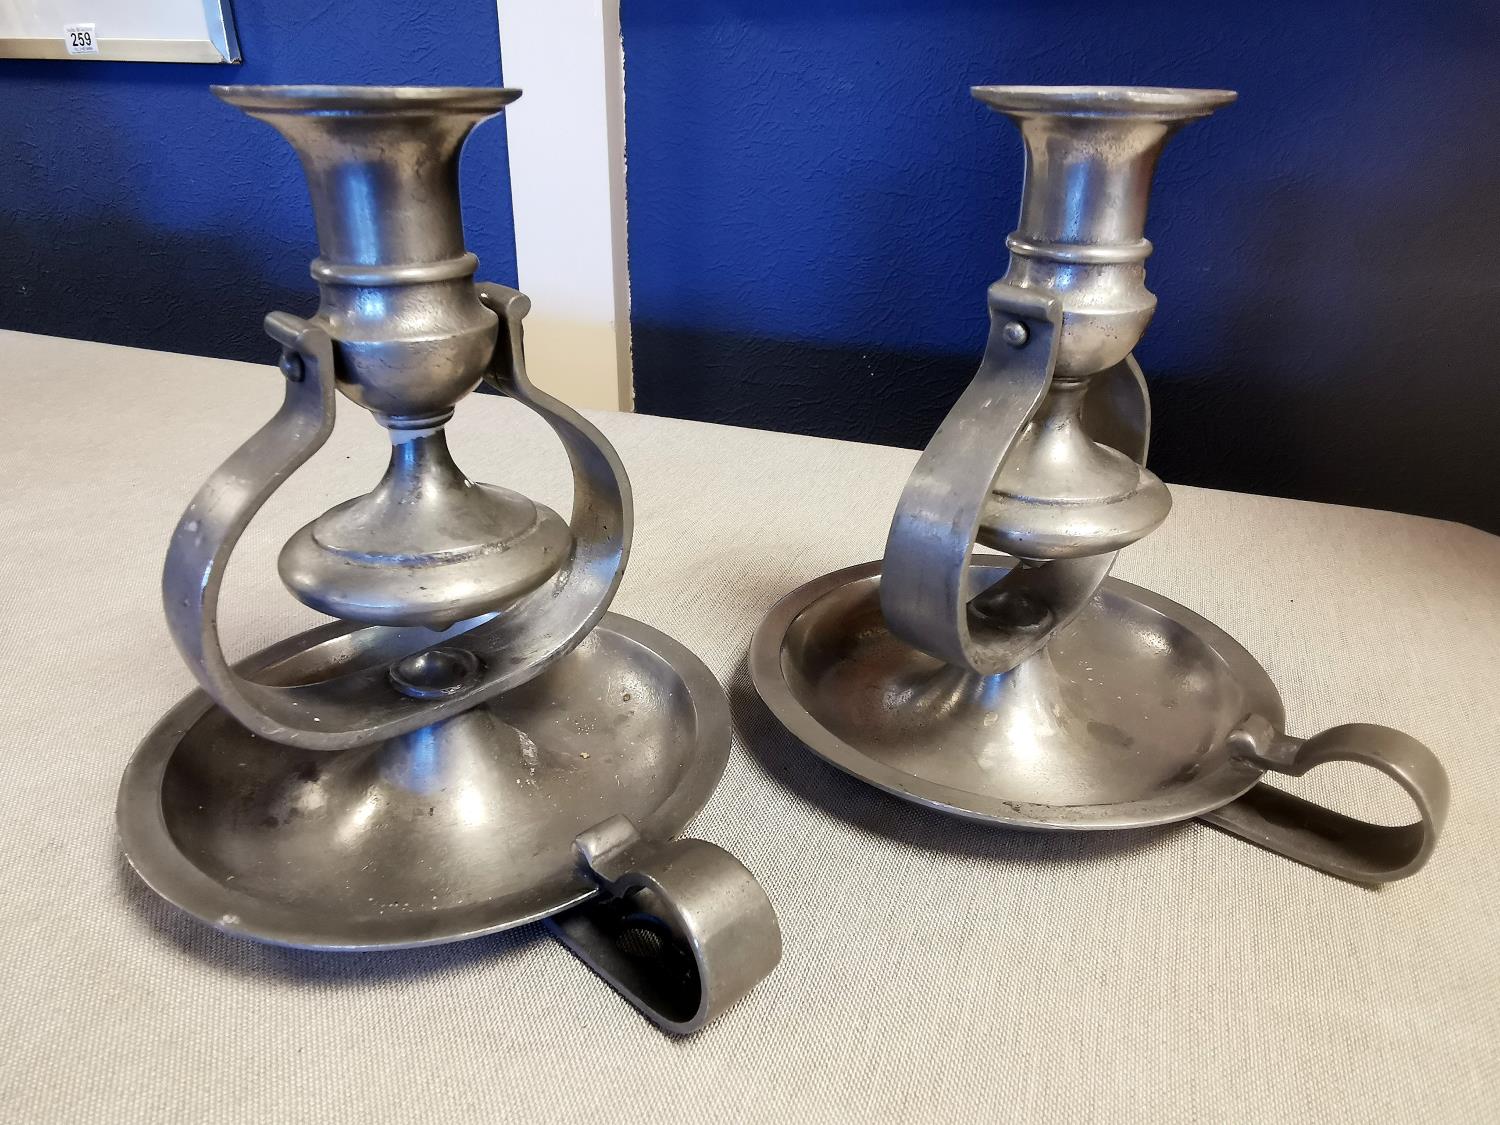 Pair of Gimballed French Les Etains De L'Abbaye Pewter Maritime Candlesticks